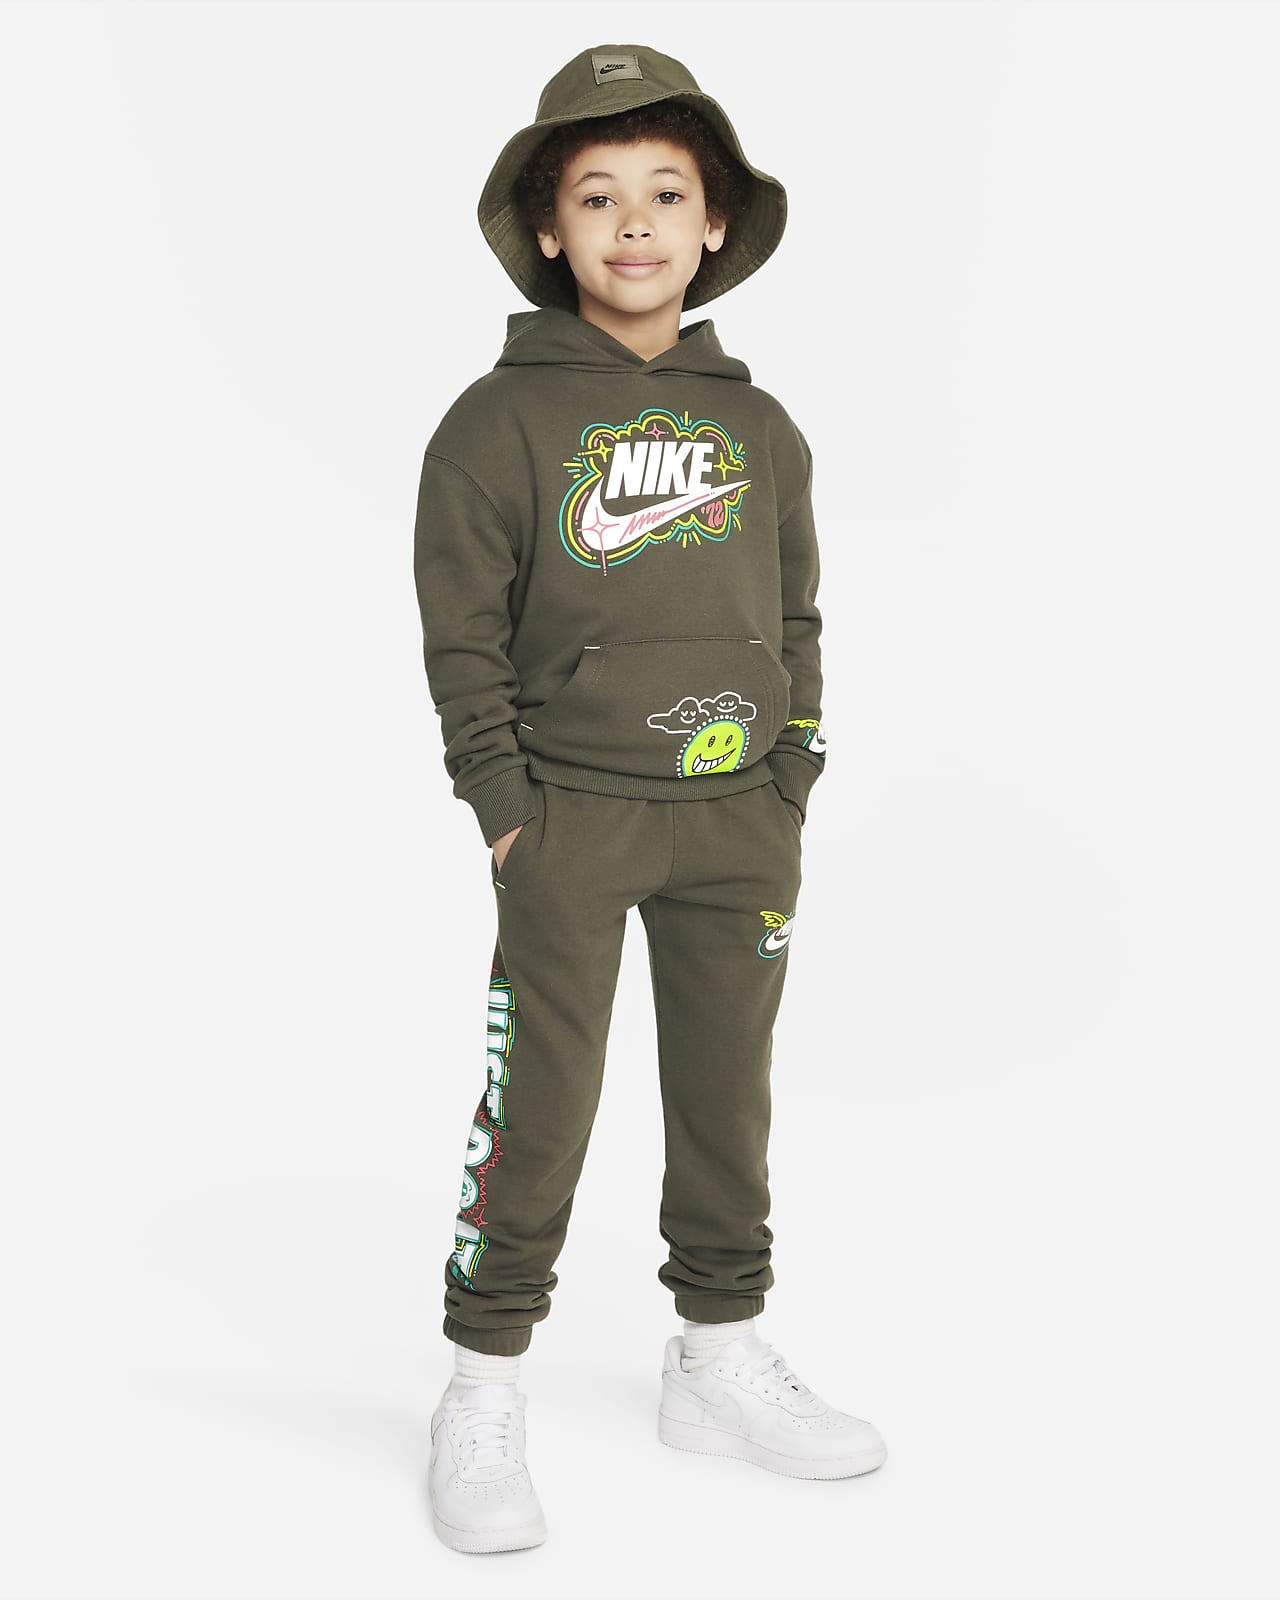 T-shirt Nike Sportswear « Art of Play » Relaxed Graphic Tee pour enfant.  Nike FR